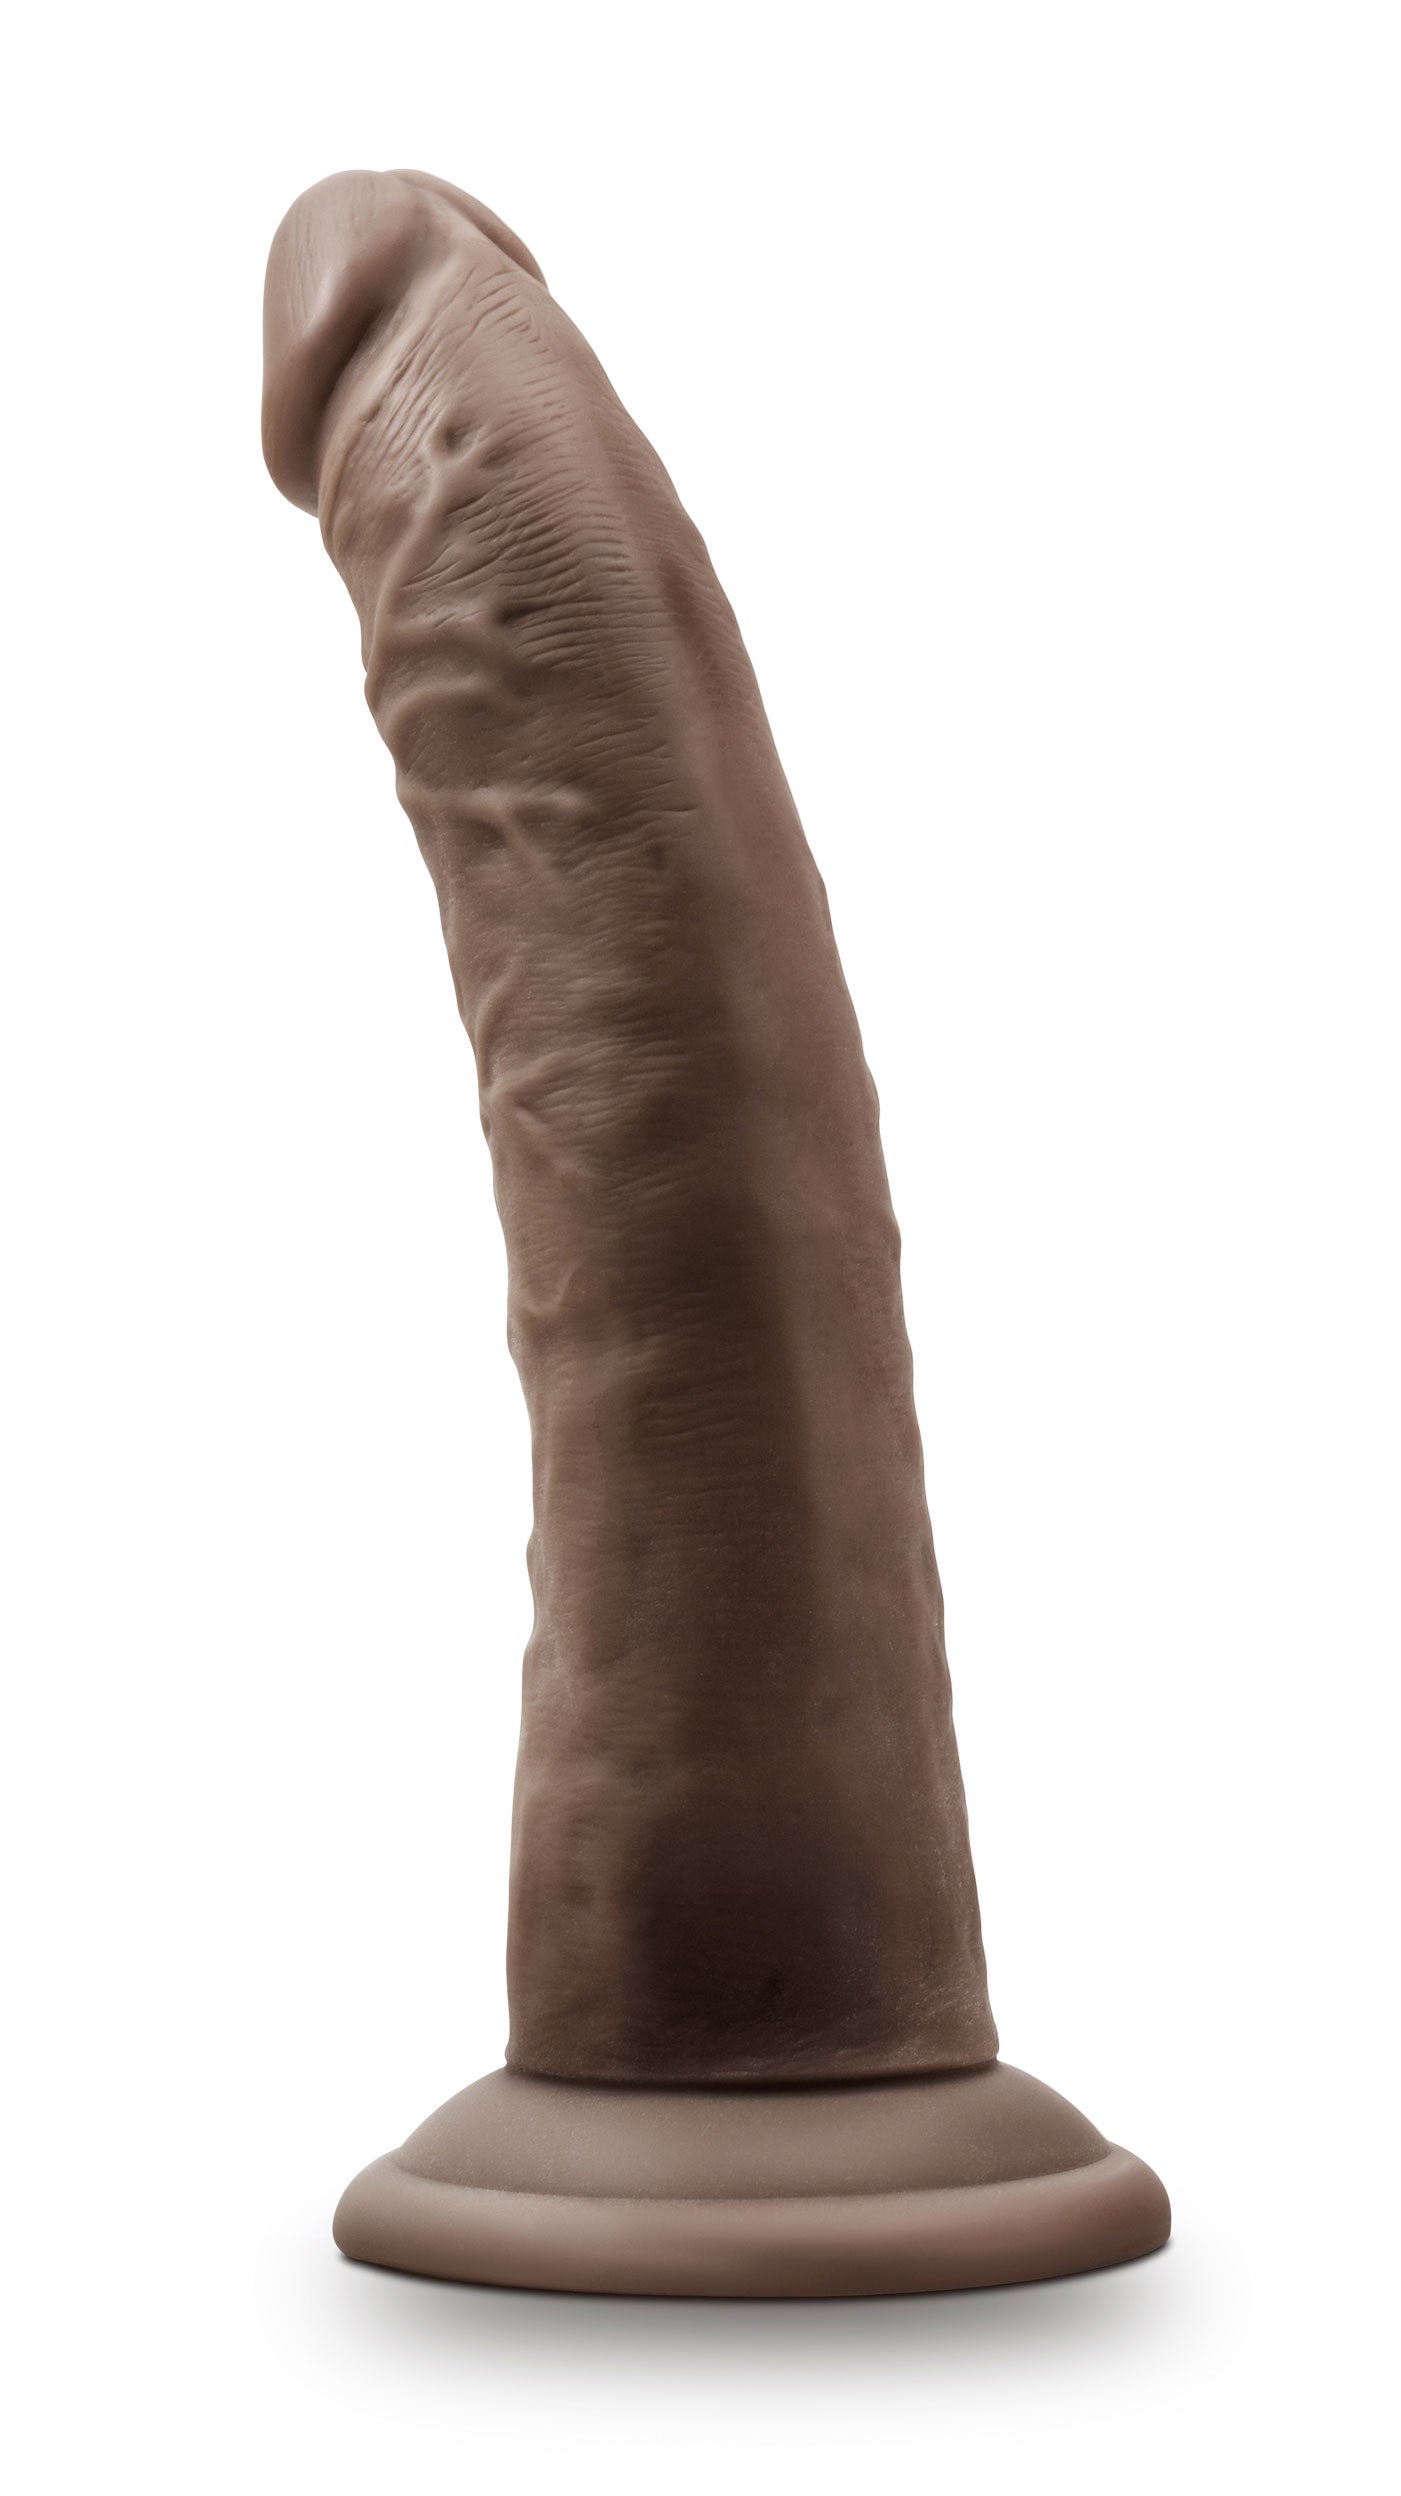 Dr. Skin Plus - 7 Inch Posable Dildo - Chocolate BL-12906